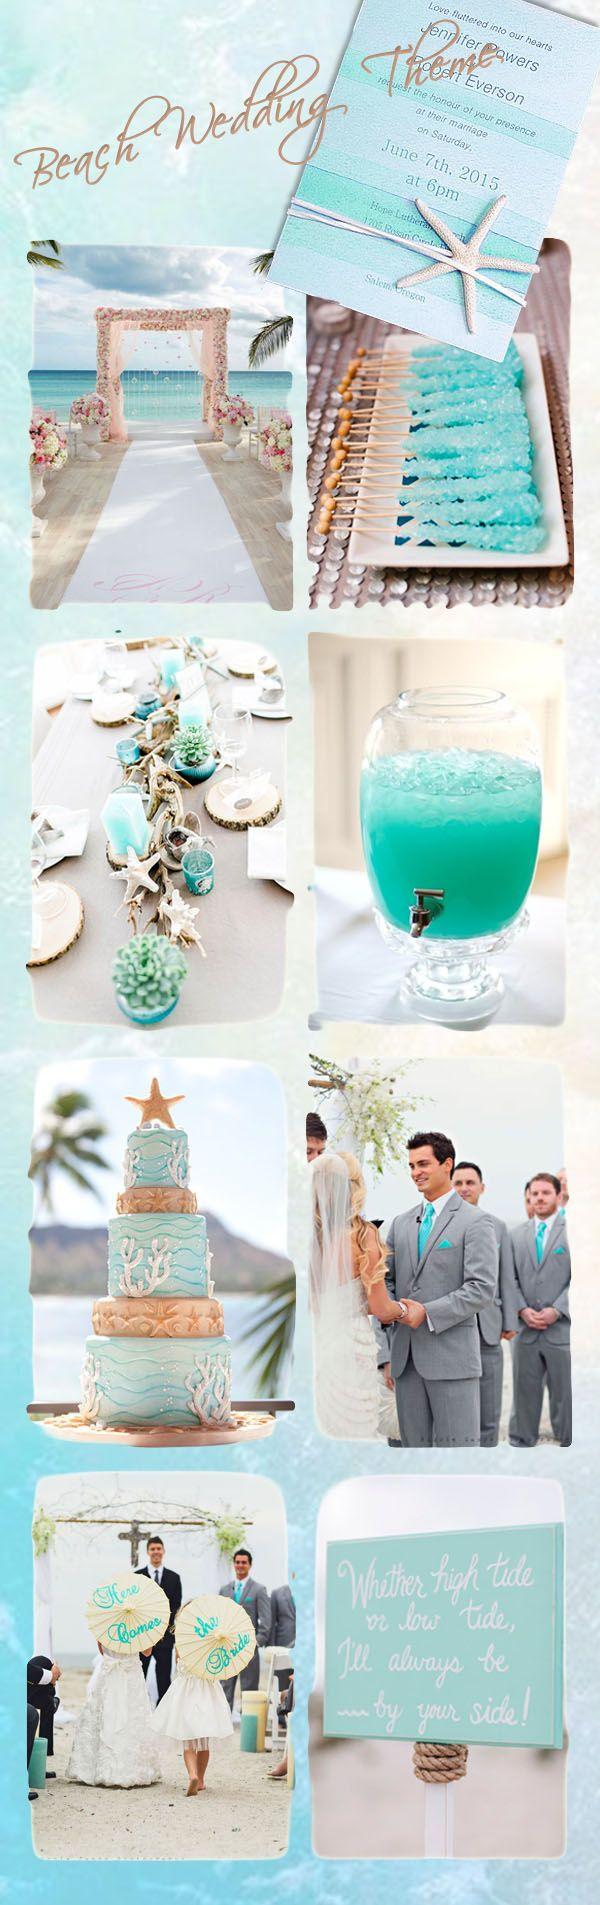 Wedding - Top Ten Wedding Theme Ideas With Beautiful Invitations-Part One